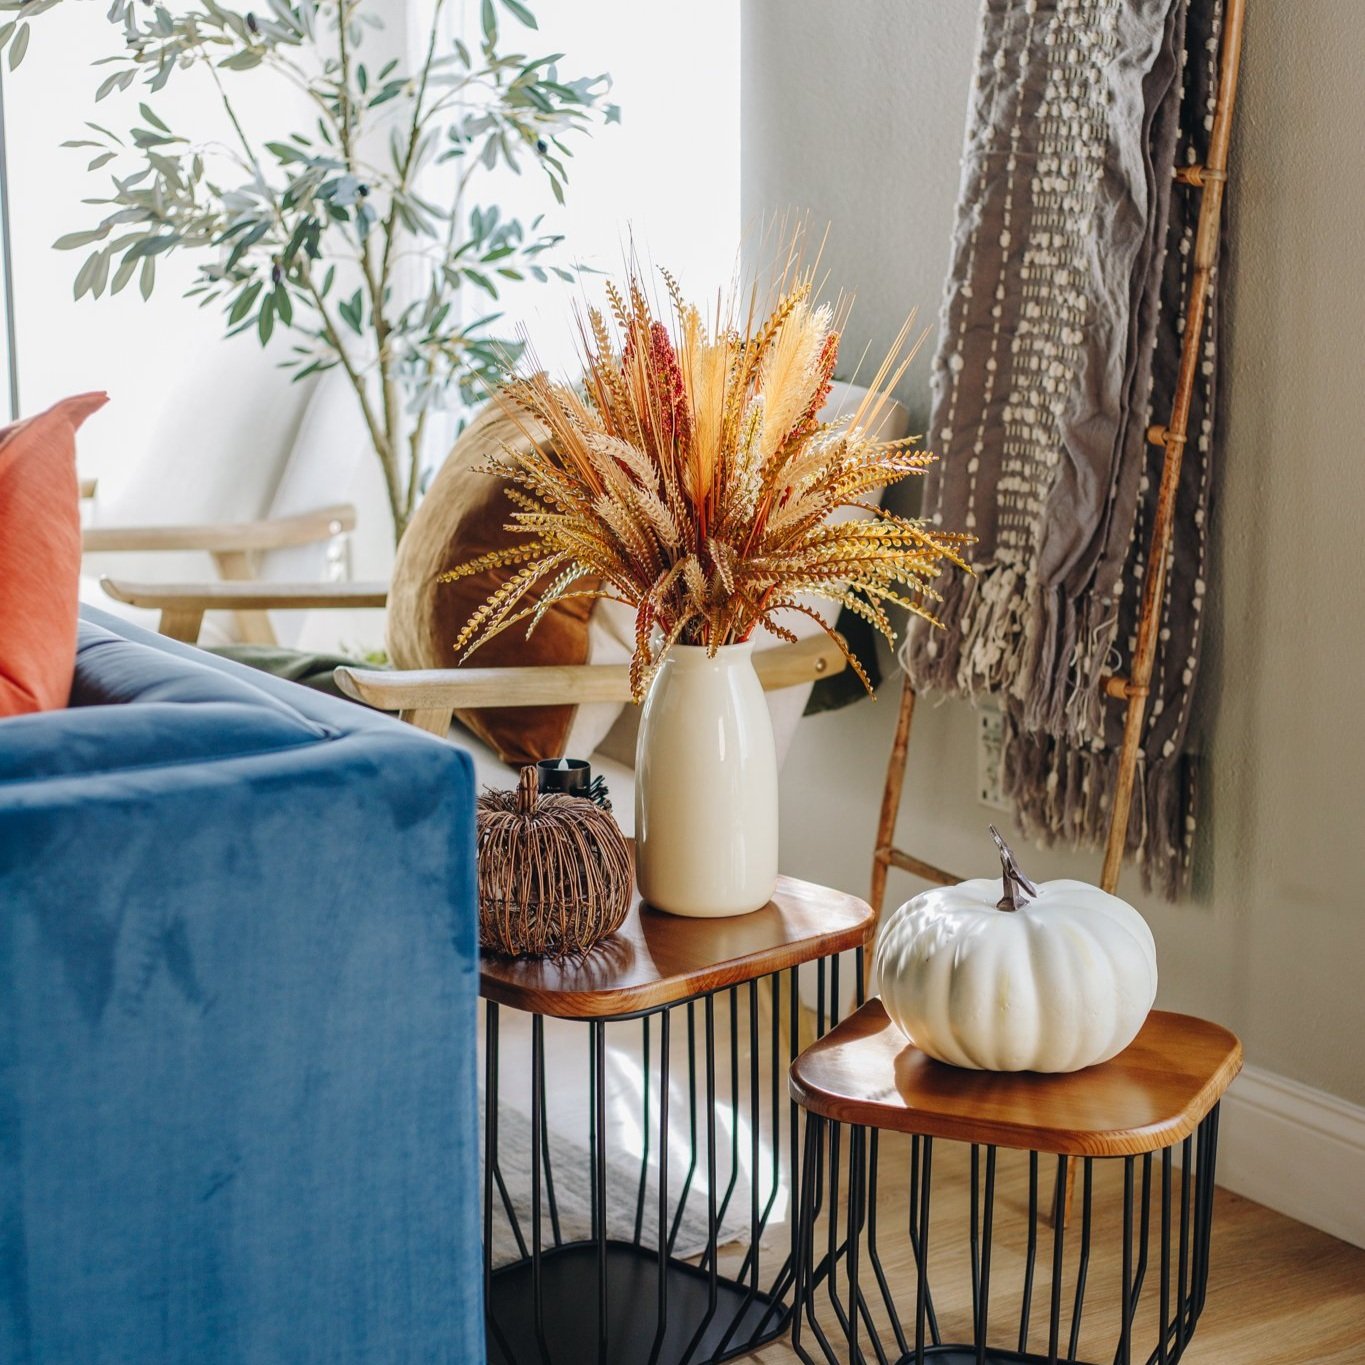 add faux plants to your home this fall to save money and time without hassle